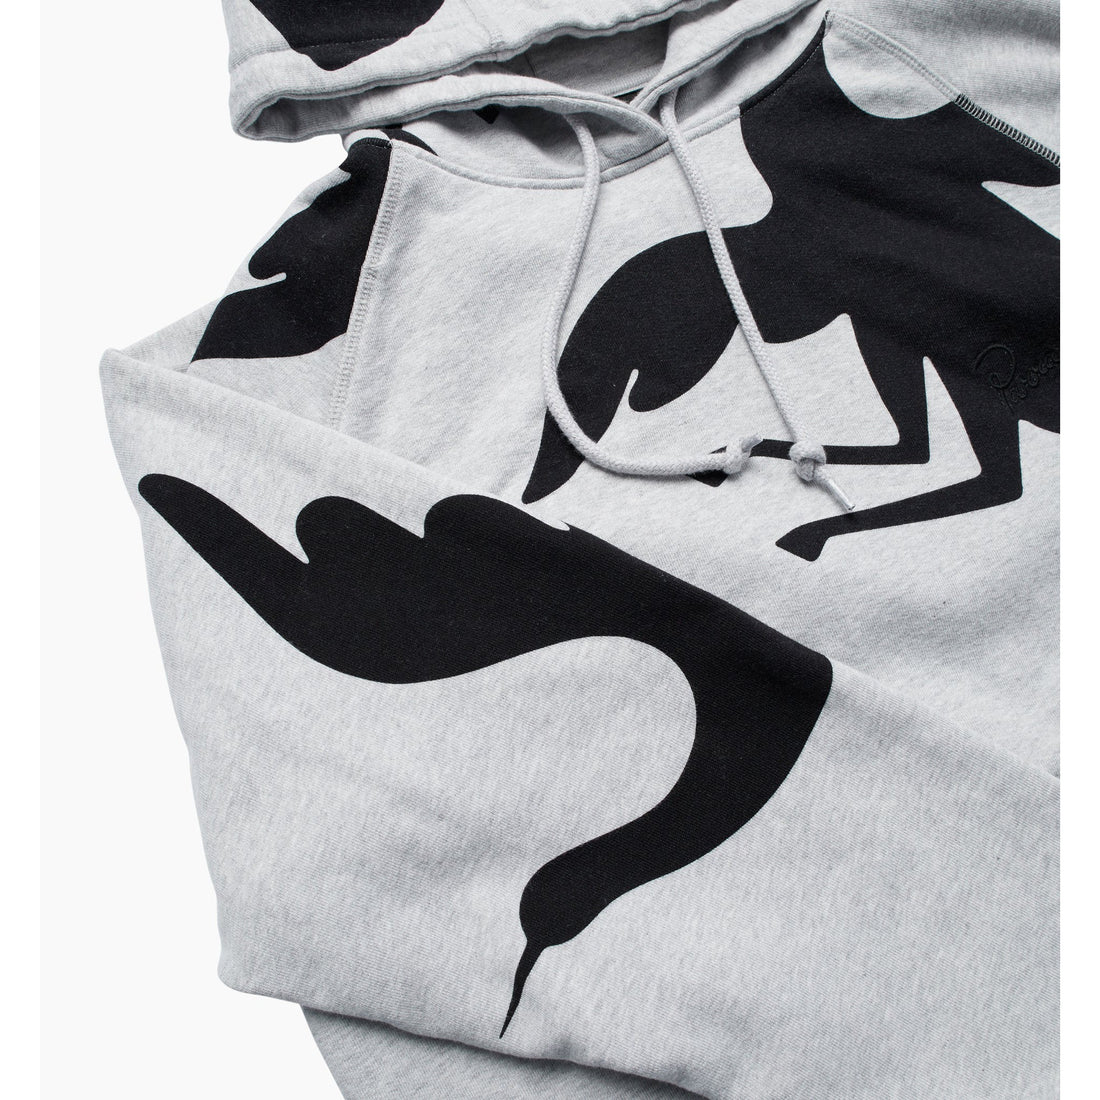 BY PARRA - CLIPPED WINGS HOODIE - HEATHER GREY